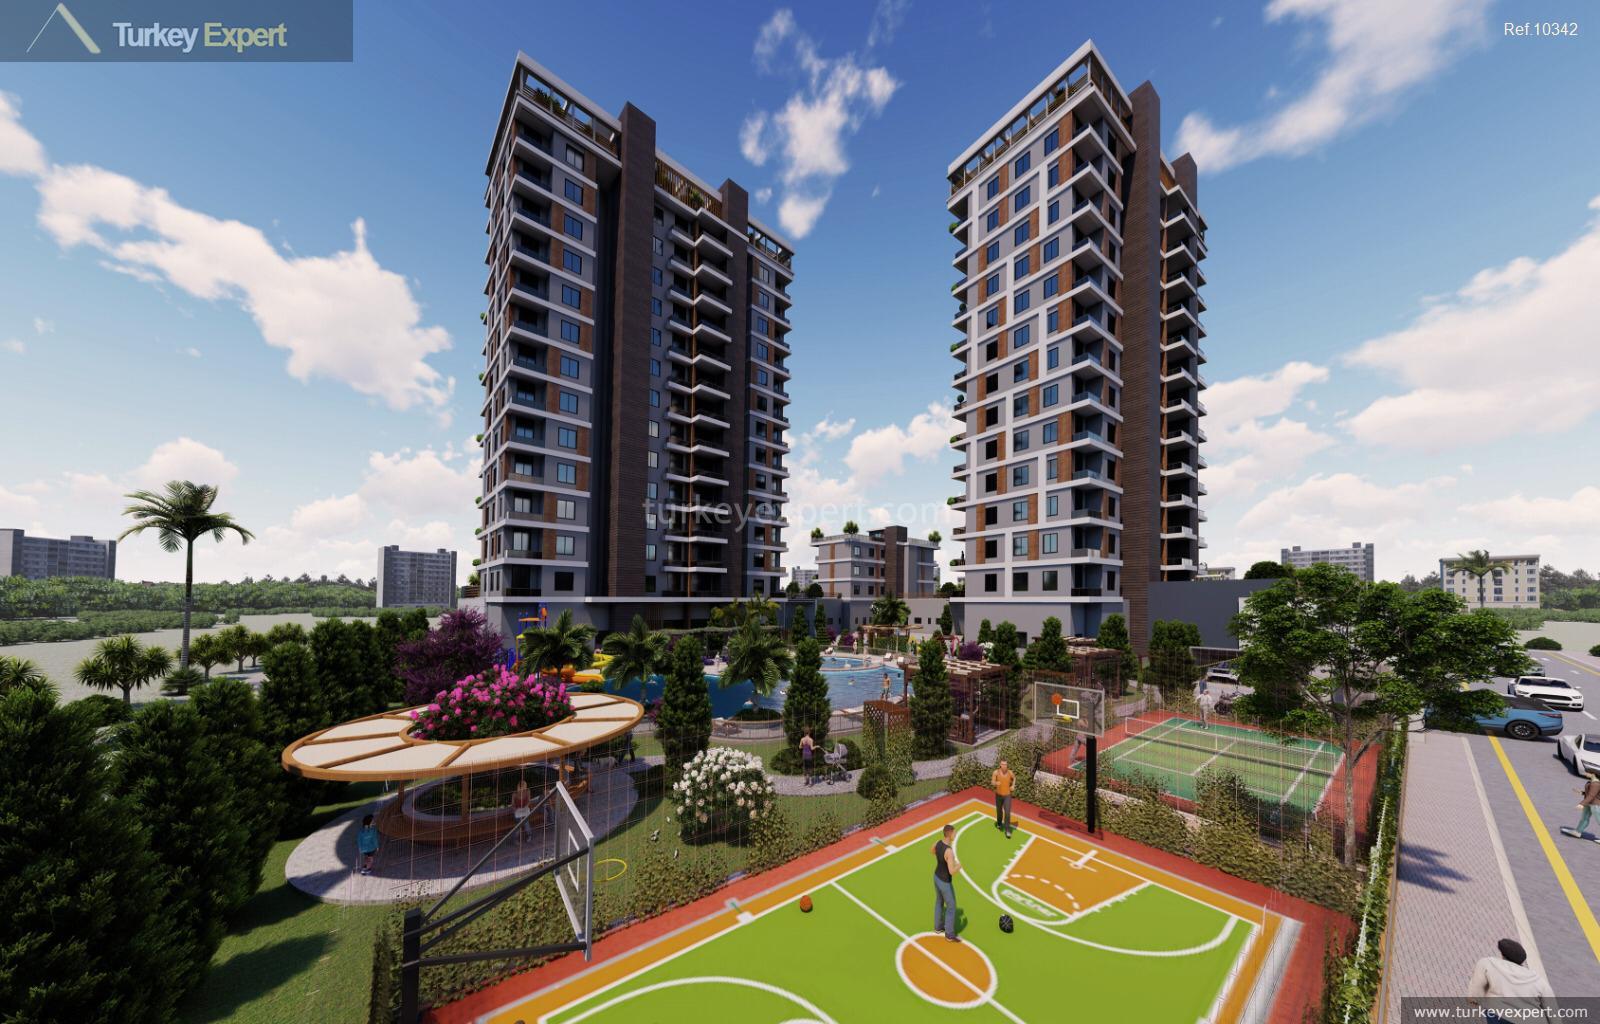 11beautiful apartments with modern features near the sea in mersin27.